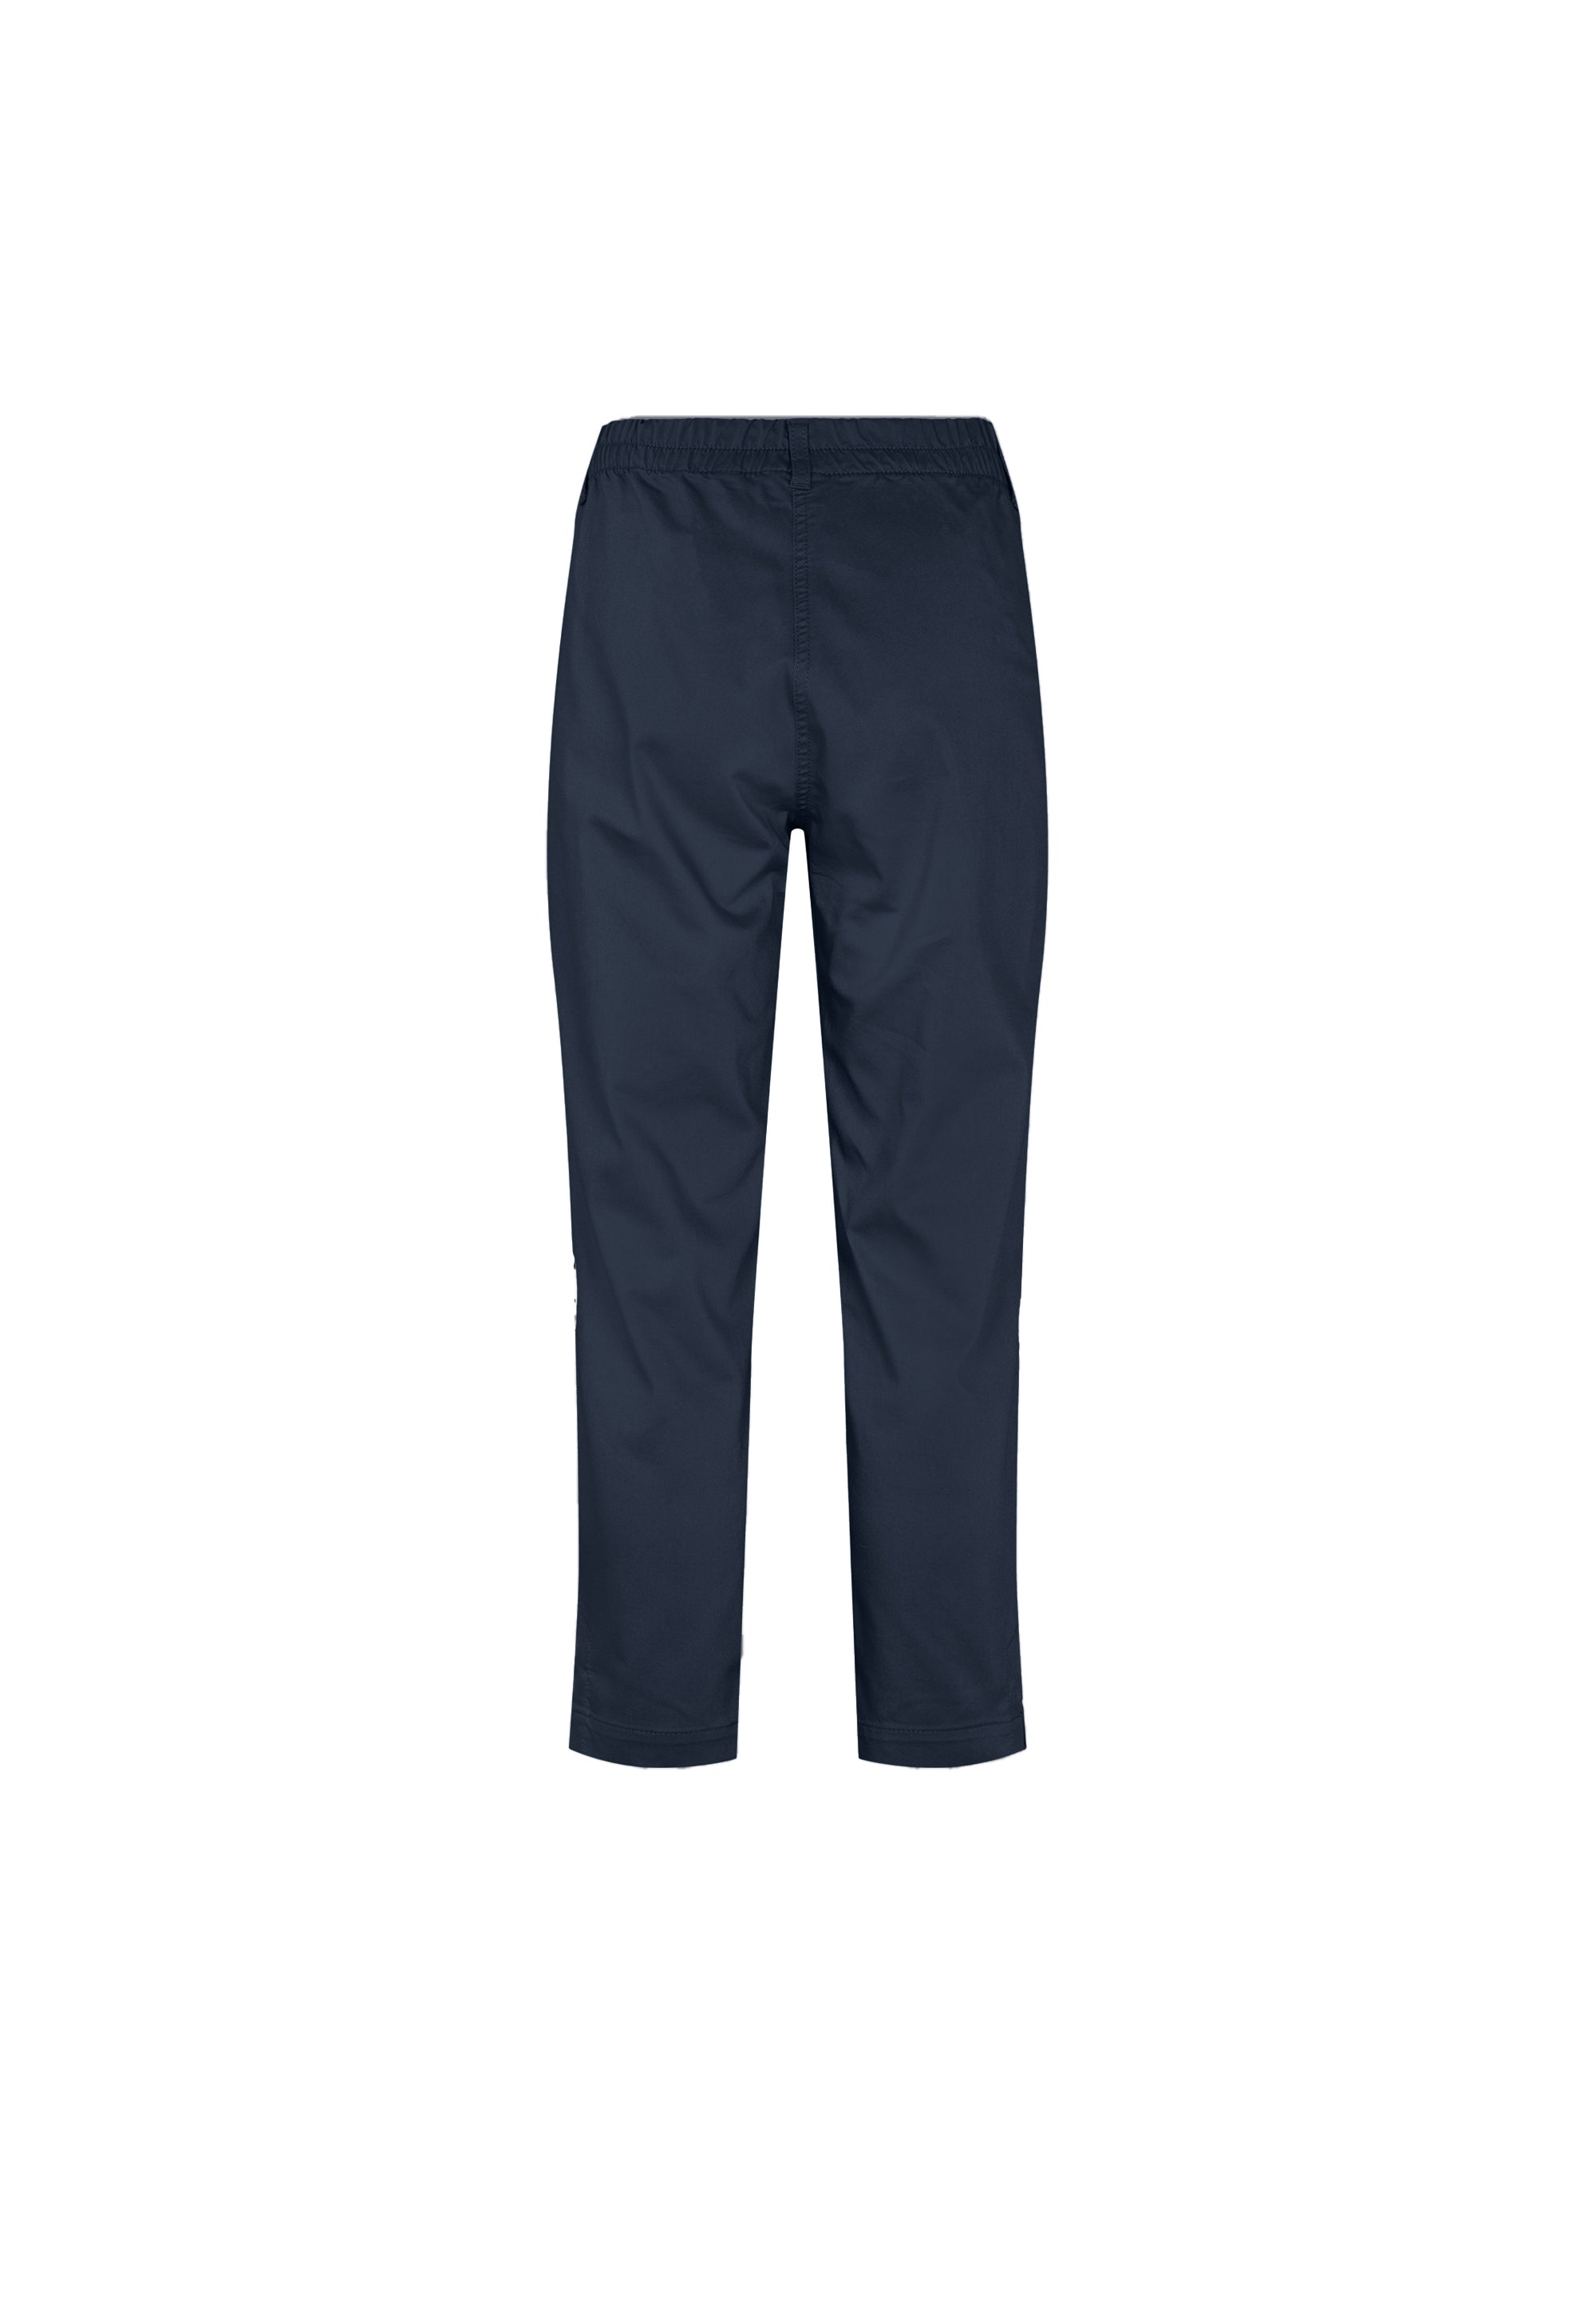 LAURIE  Ellie Relaxed - Extra Short Length Trousers RELAXED Marine